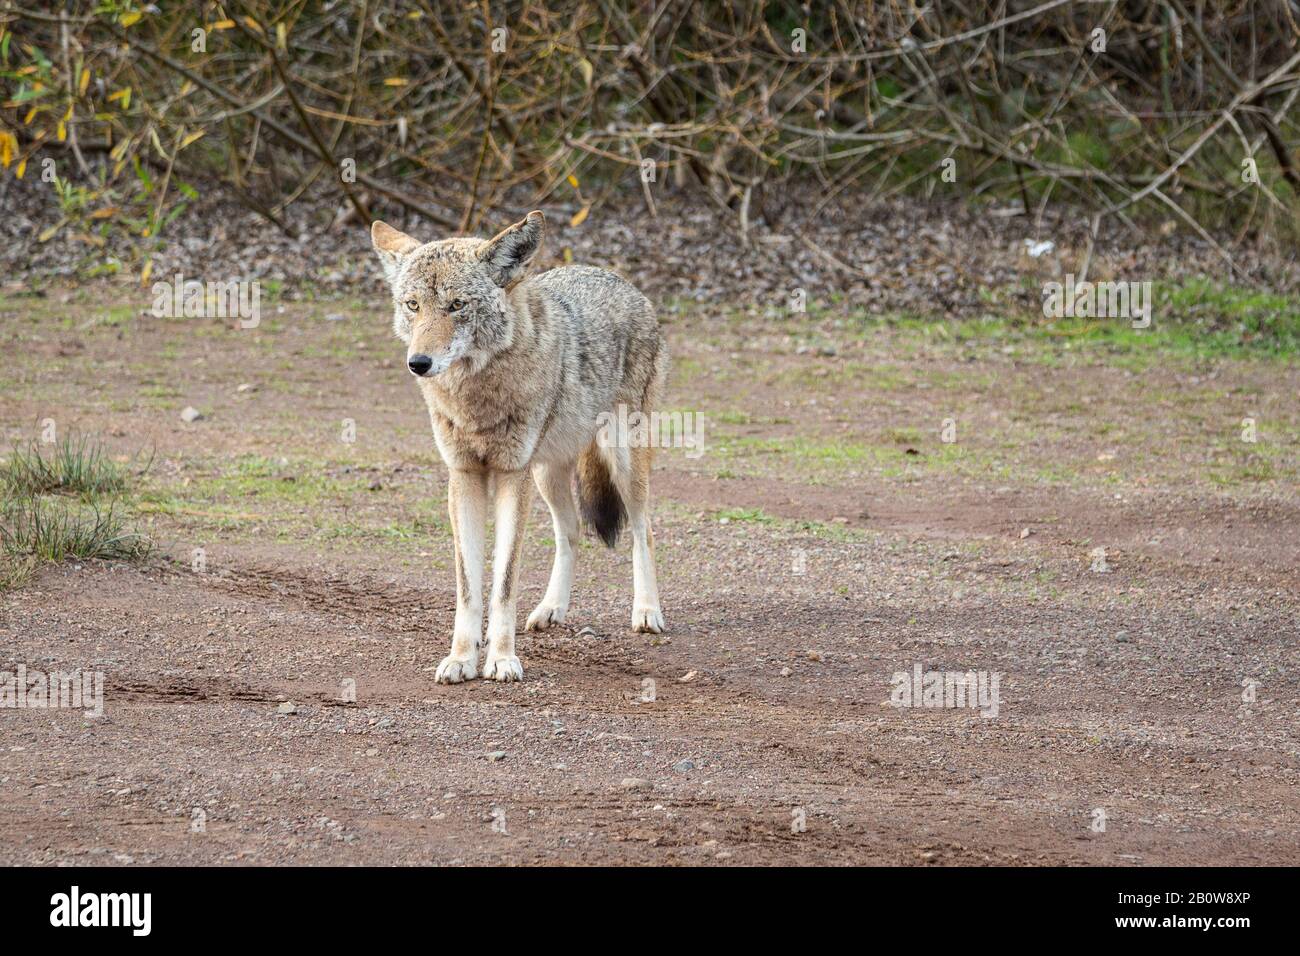 A wild coyote emerges from the undergrowth looking for a hand-out, curious tourists watch attentively. Stock Photo